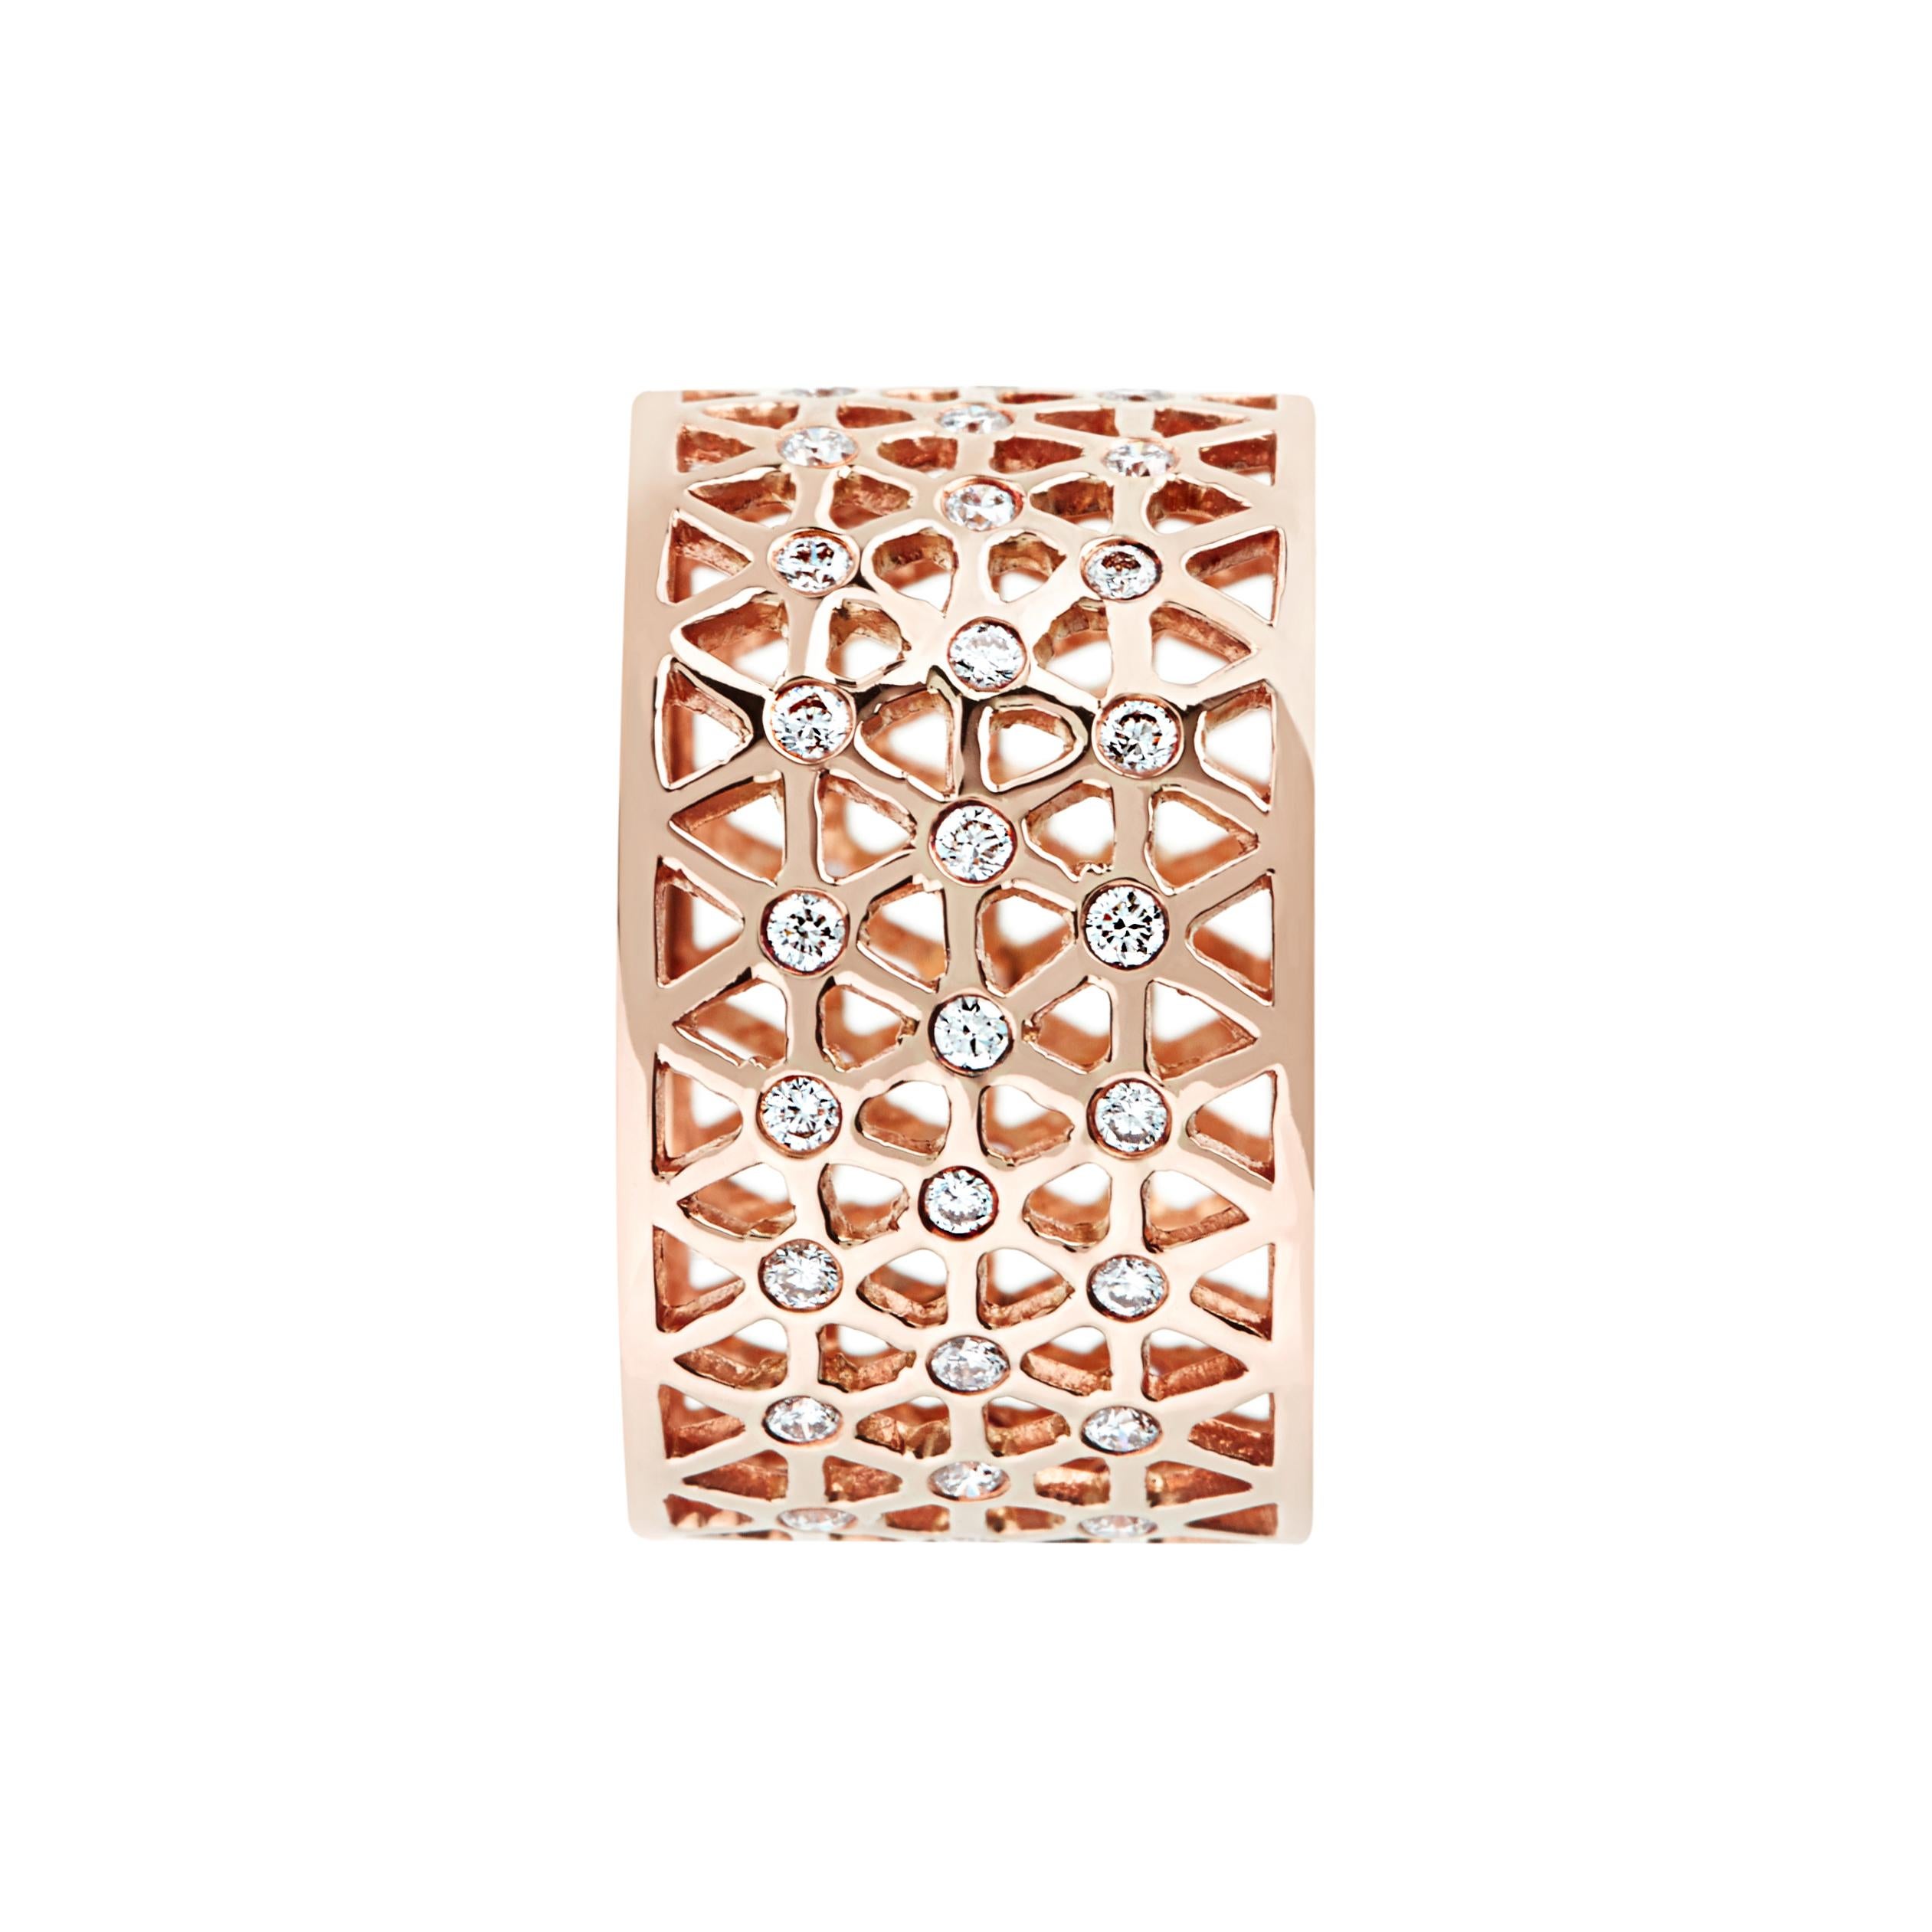 Handcrafted 0.19 Carat Diamonds 18 Karat Rose Gold Band Ring. Delicate hand pierced band ring adorned with white diamonds. Can be worn both with a casual outfit for an every day look or with a more elegant outfit. Showcasing our designer's signature